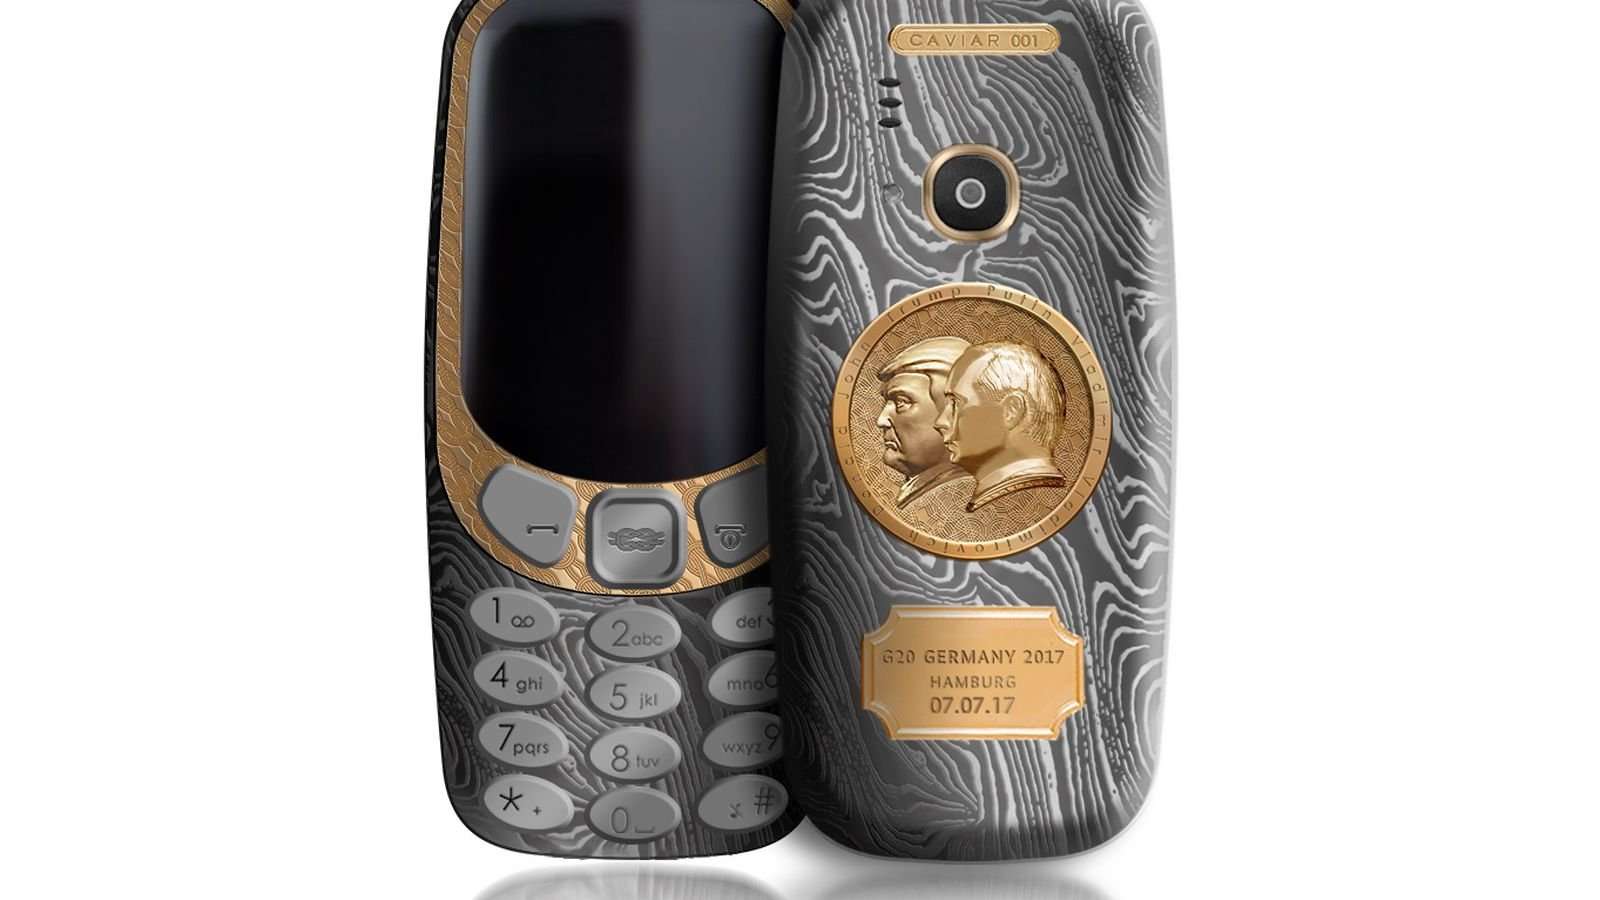 image for This $2,500 Nokia phone commemorates the meeting of Trump and Putin